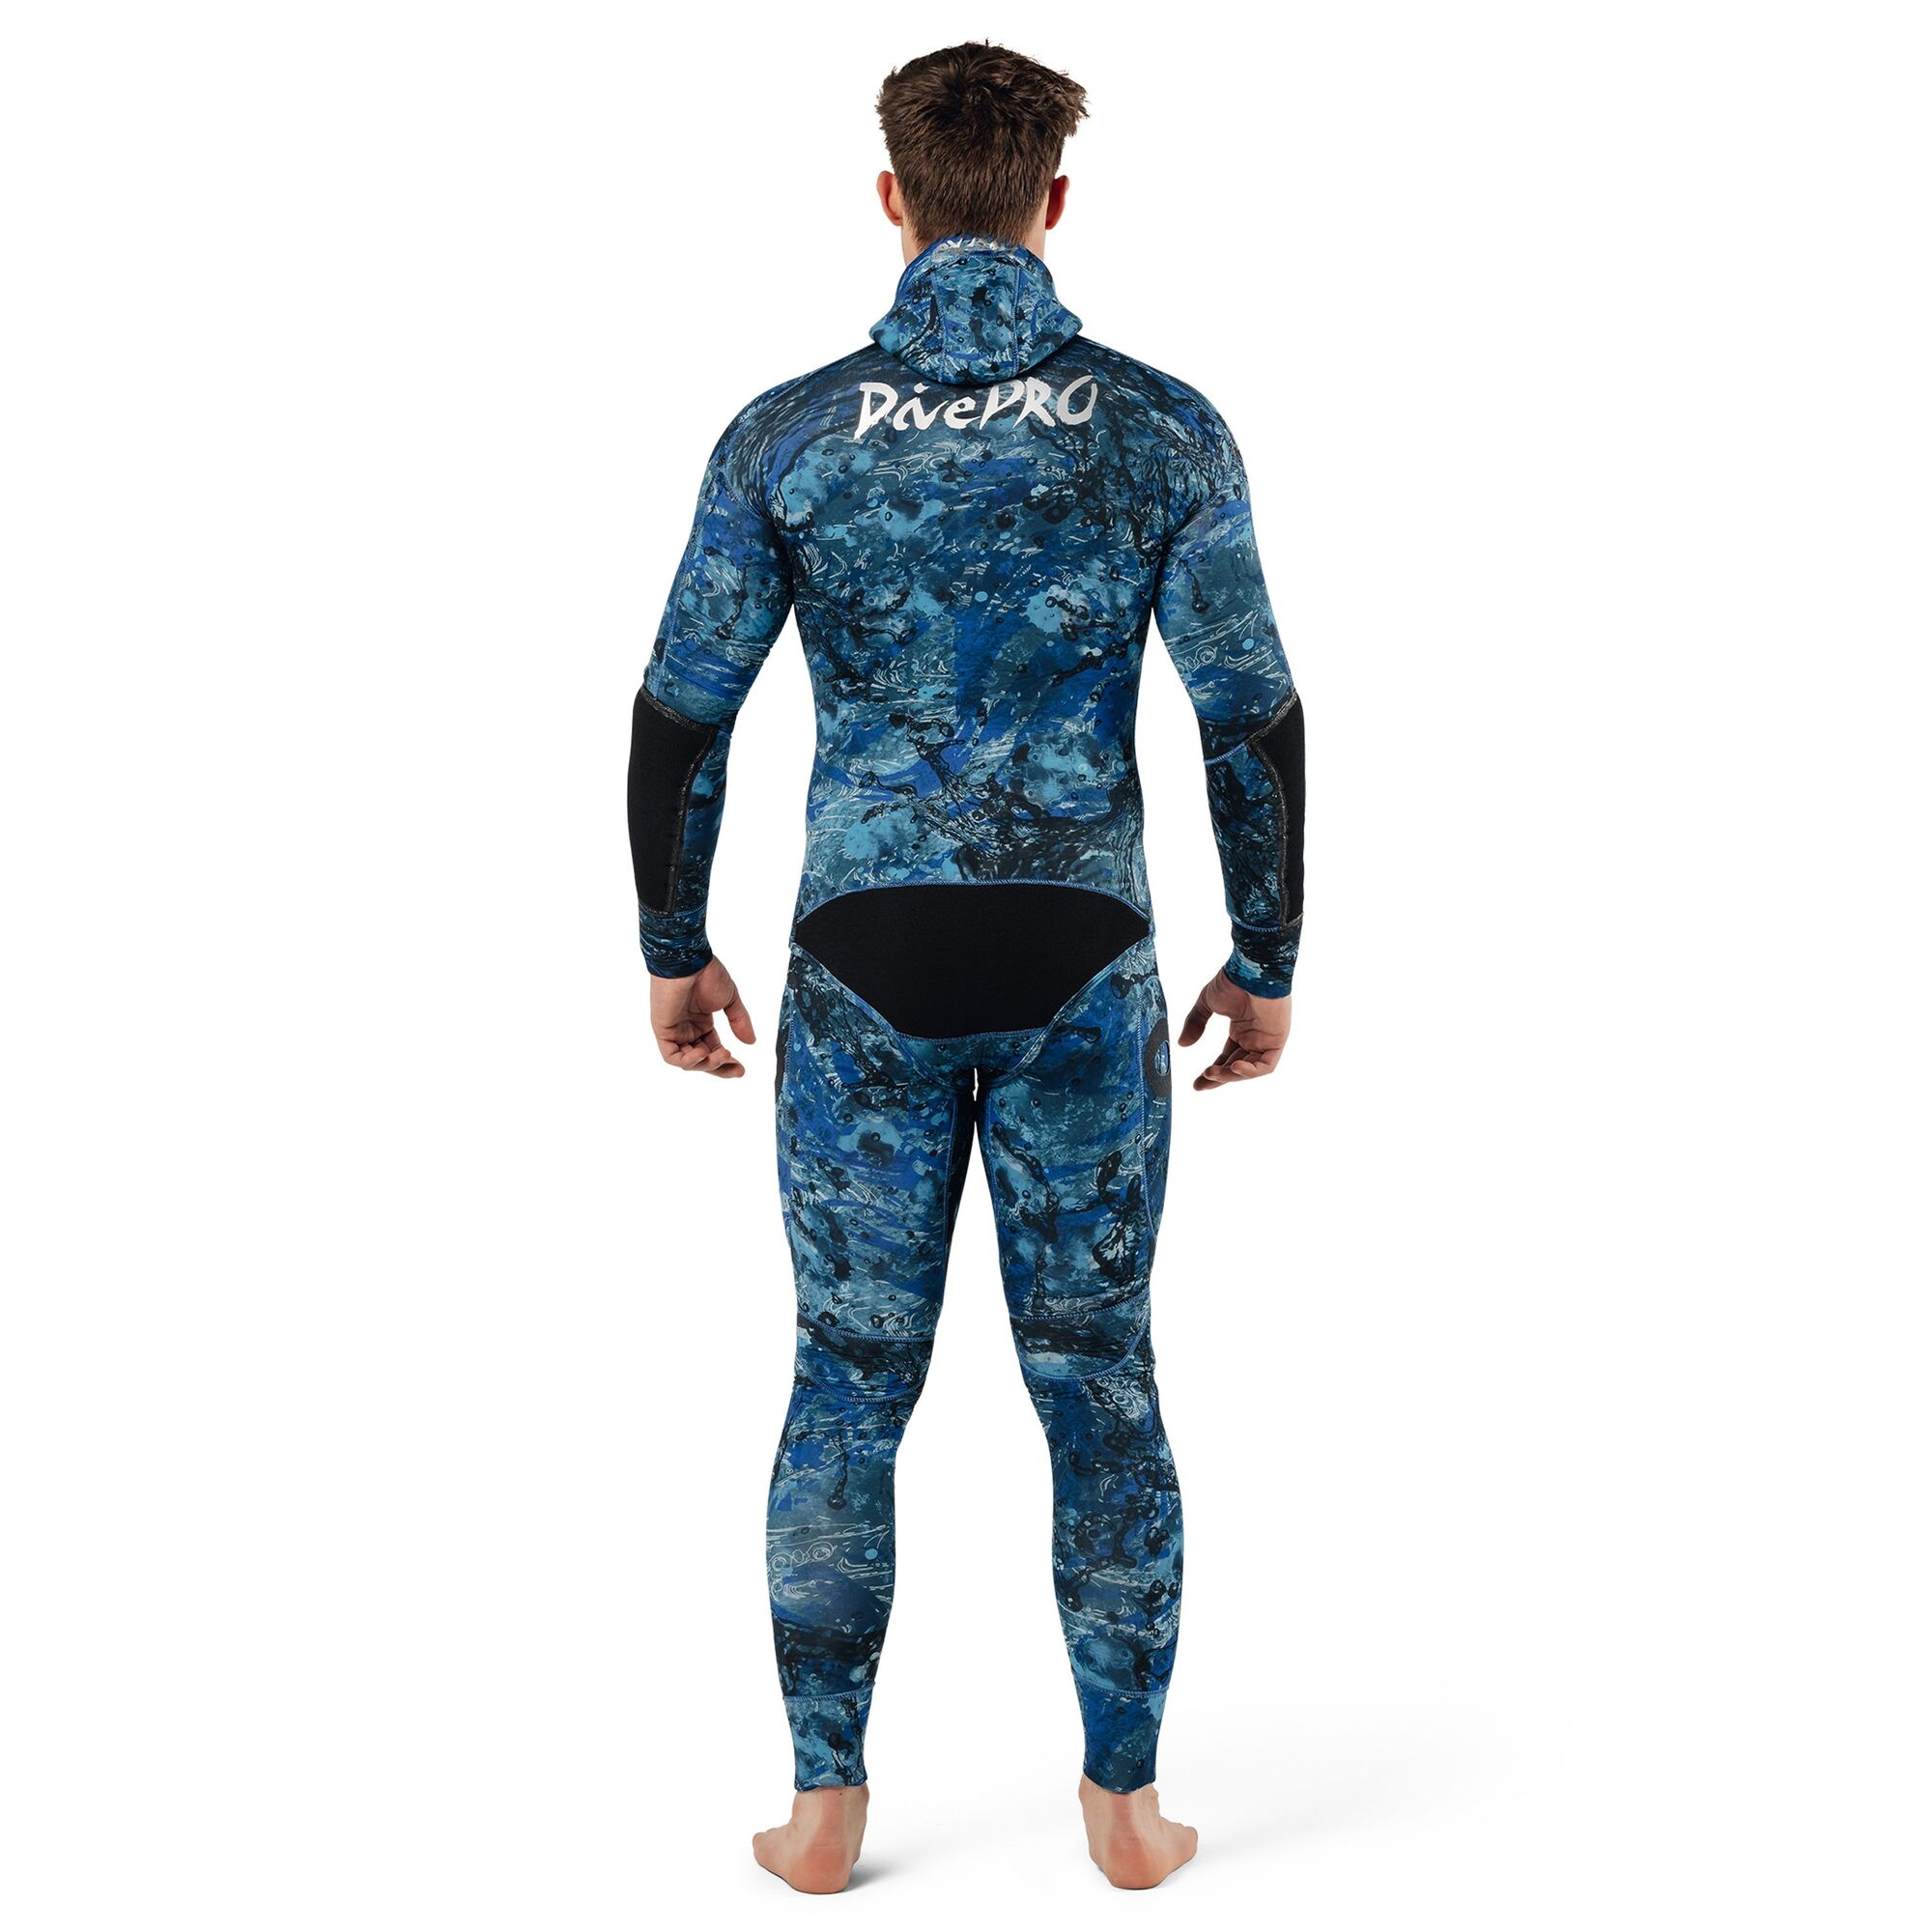 1.5mm Neoprene Camo Diving Suit Freediving Spearfishing Wetsuit w/Attached  Hood